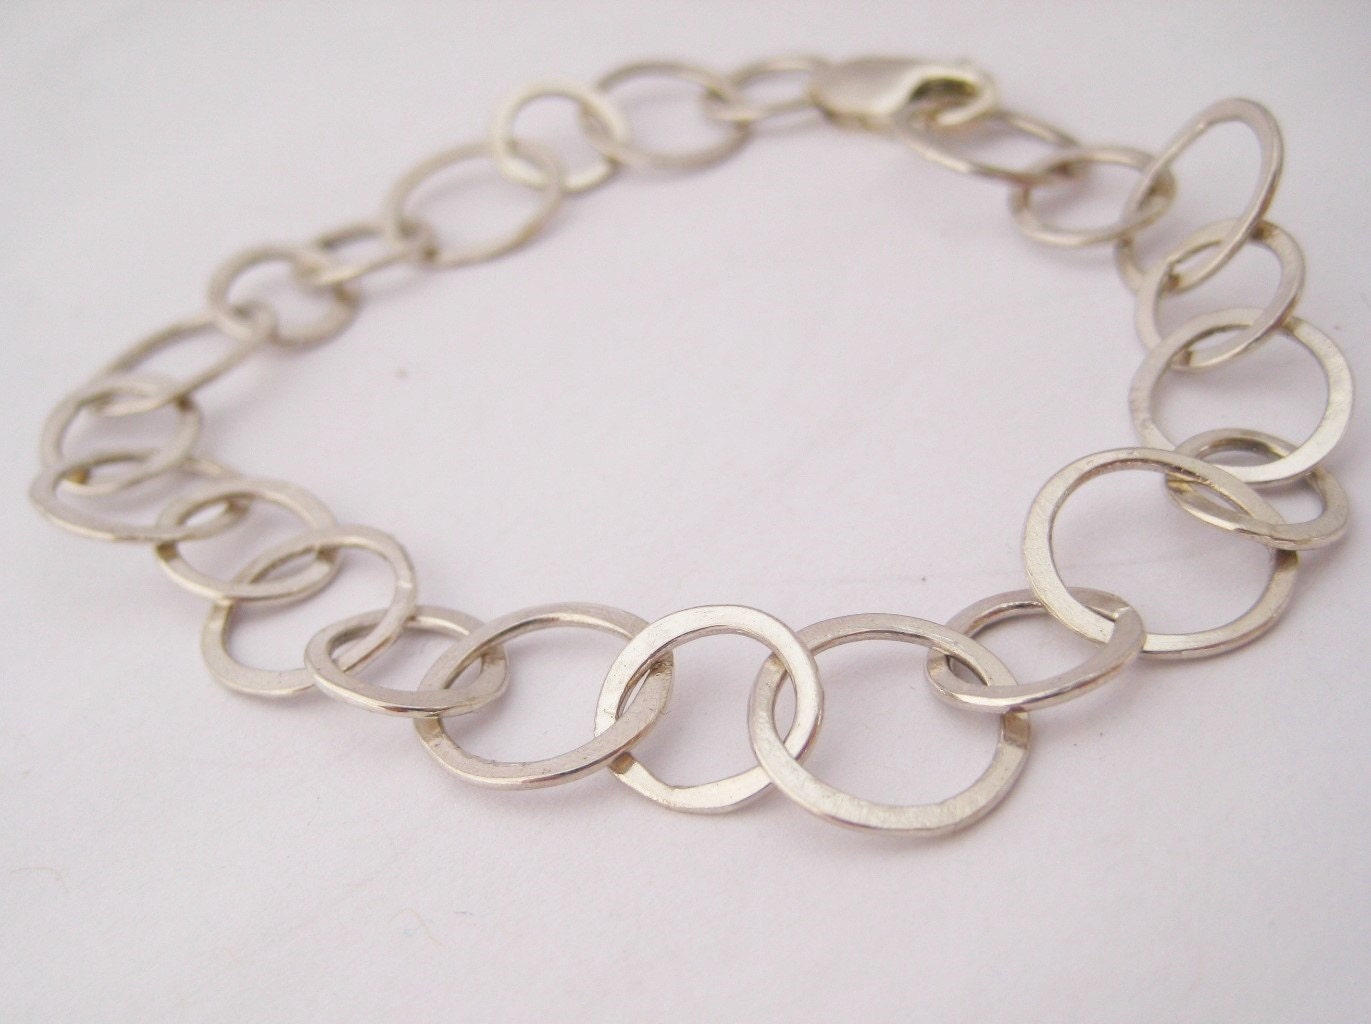 Large links Circles hand forged chain by KimStylesJewellery